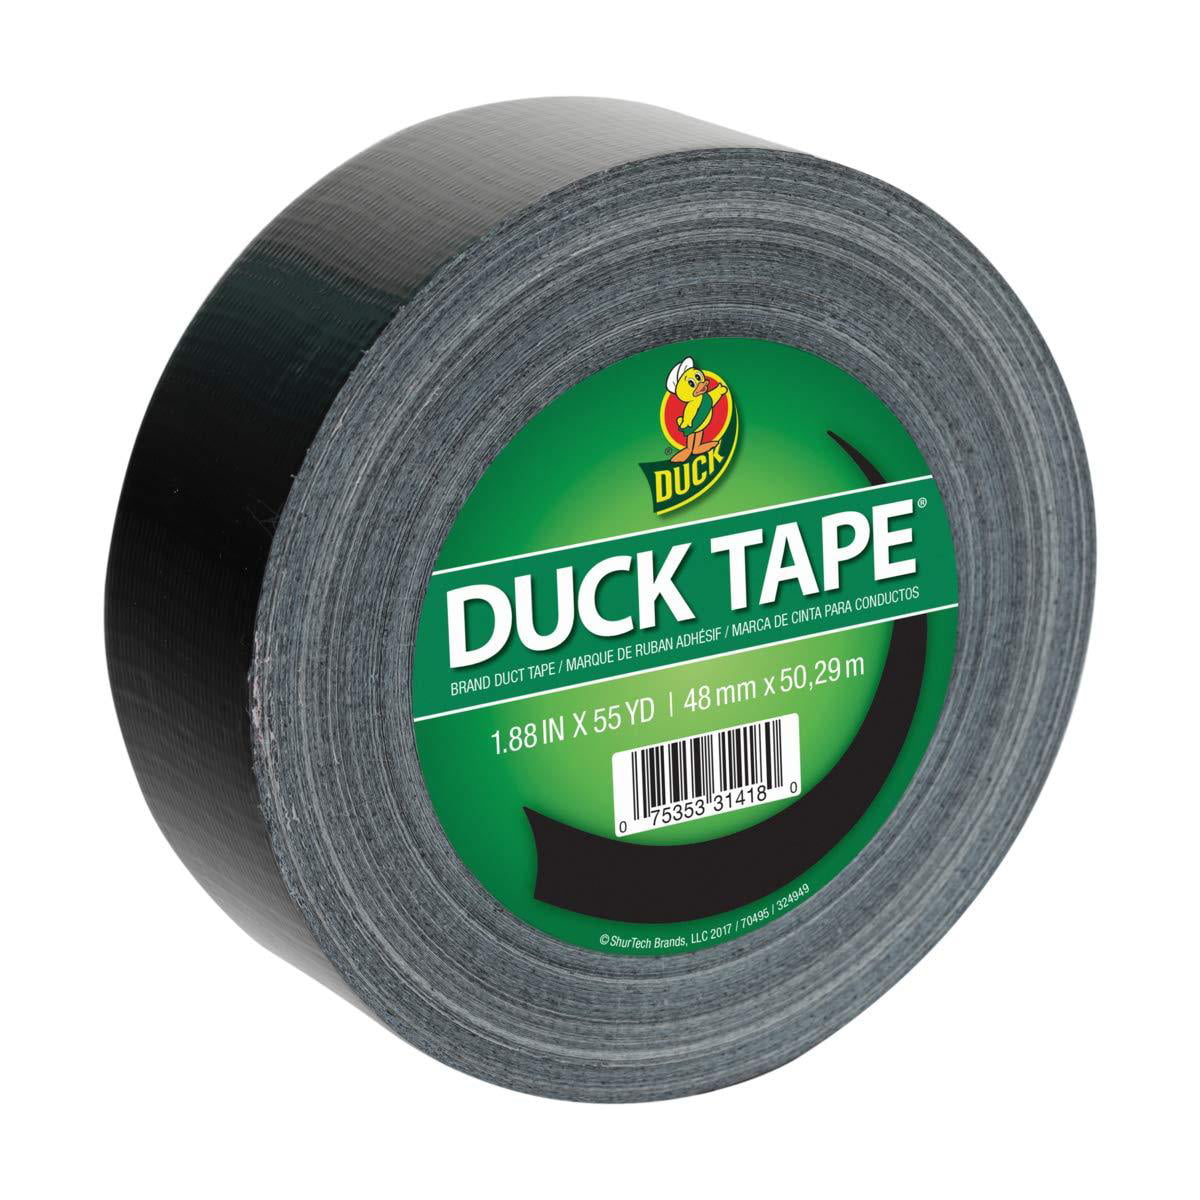 rolls Shurtech 1304965 1.88" x 20 Yards Mud Puddle Brown Duck Duct Tape 6 